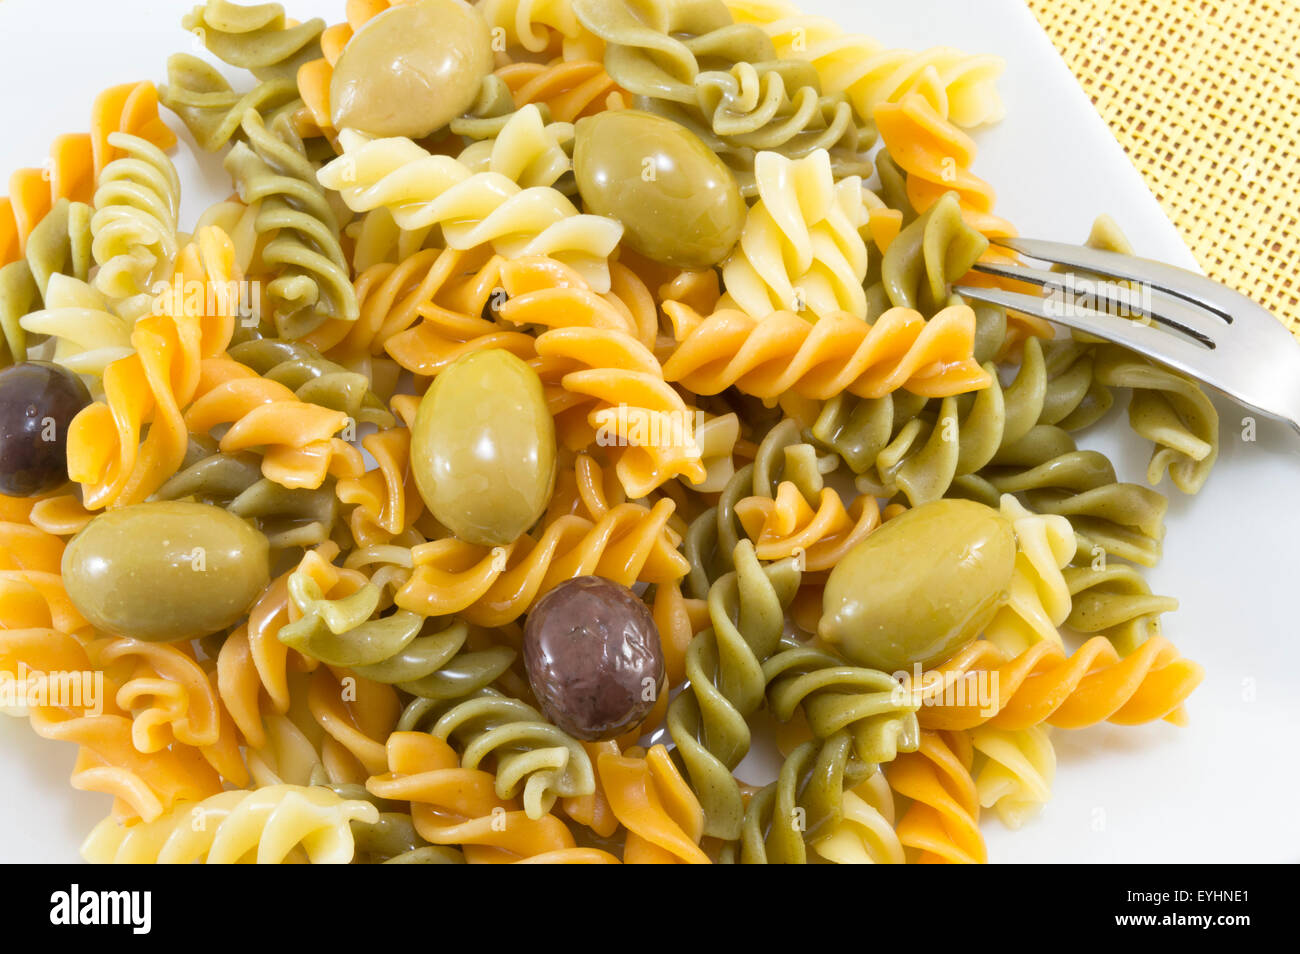 Colored pasta meal with olives close up Stock Photo